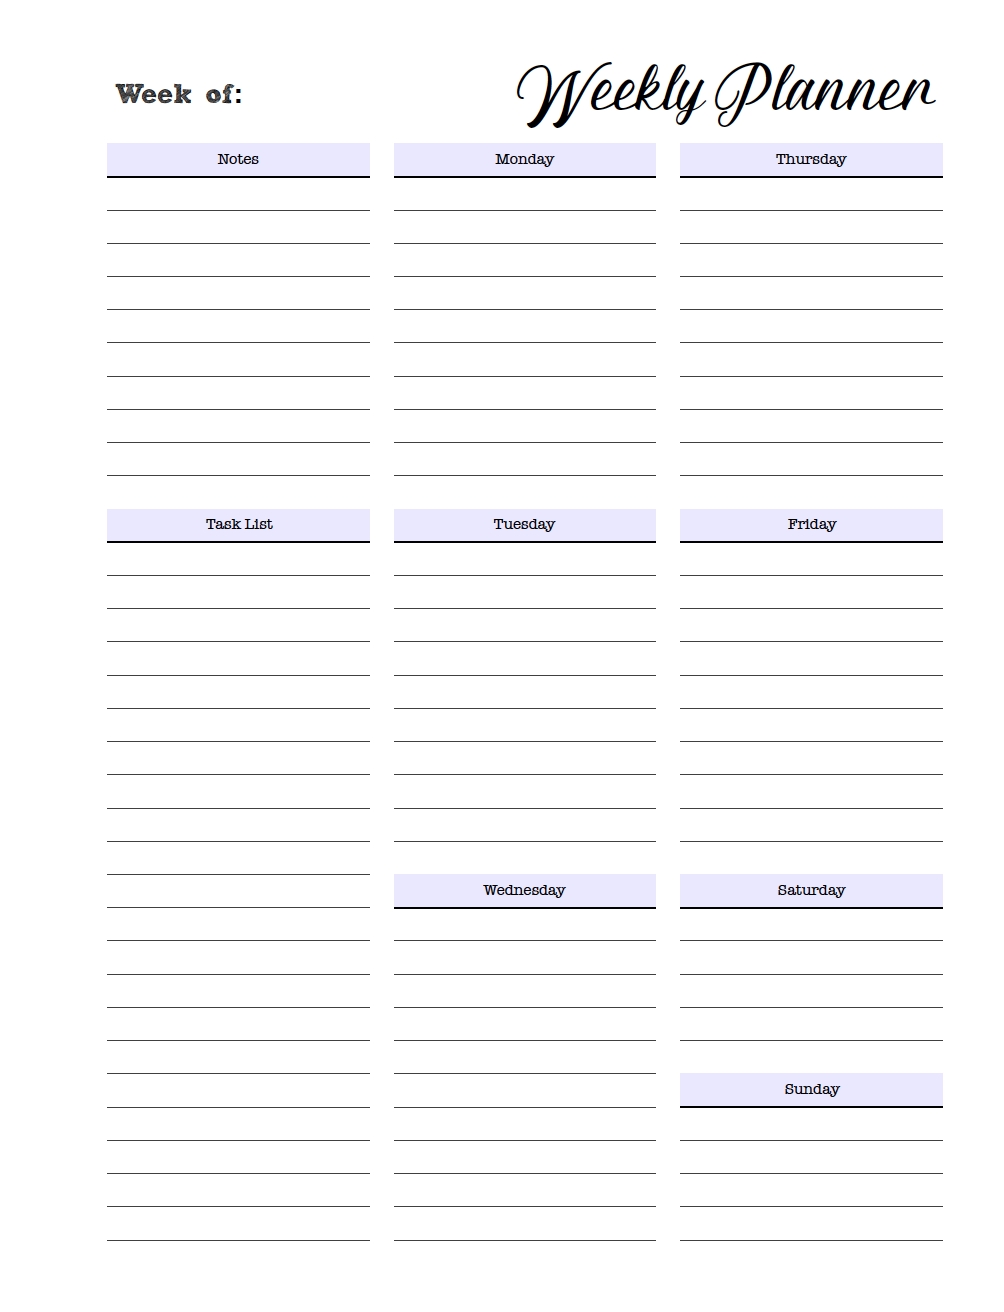 Free Printable Weekly Planners: Monday Start  Pweakley Planner Mon To Sunday